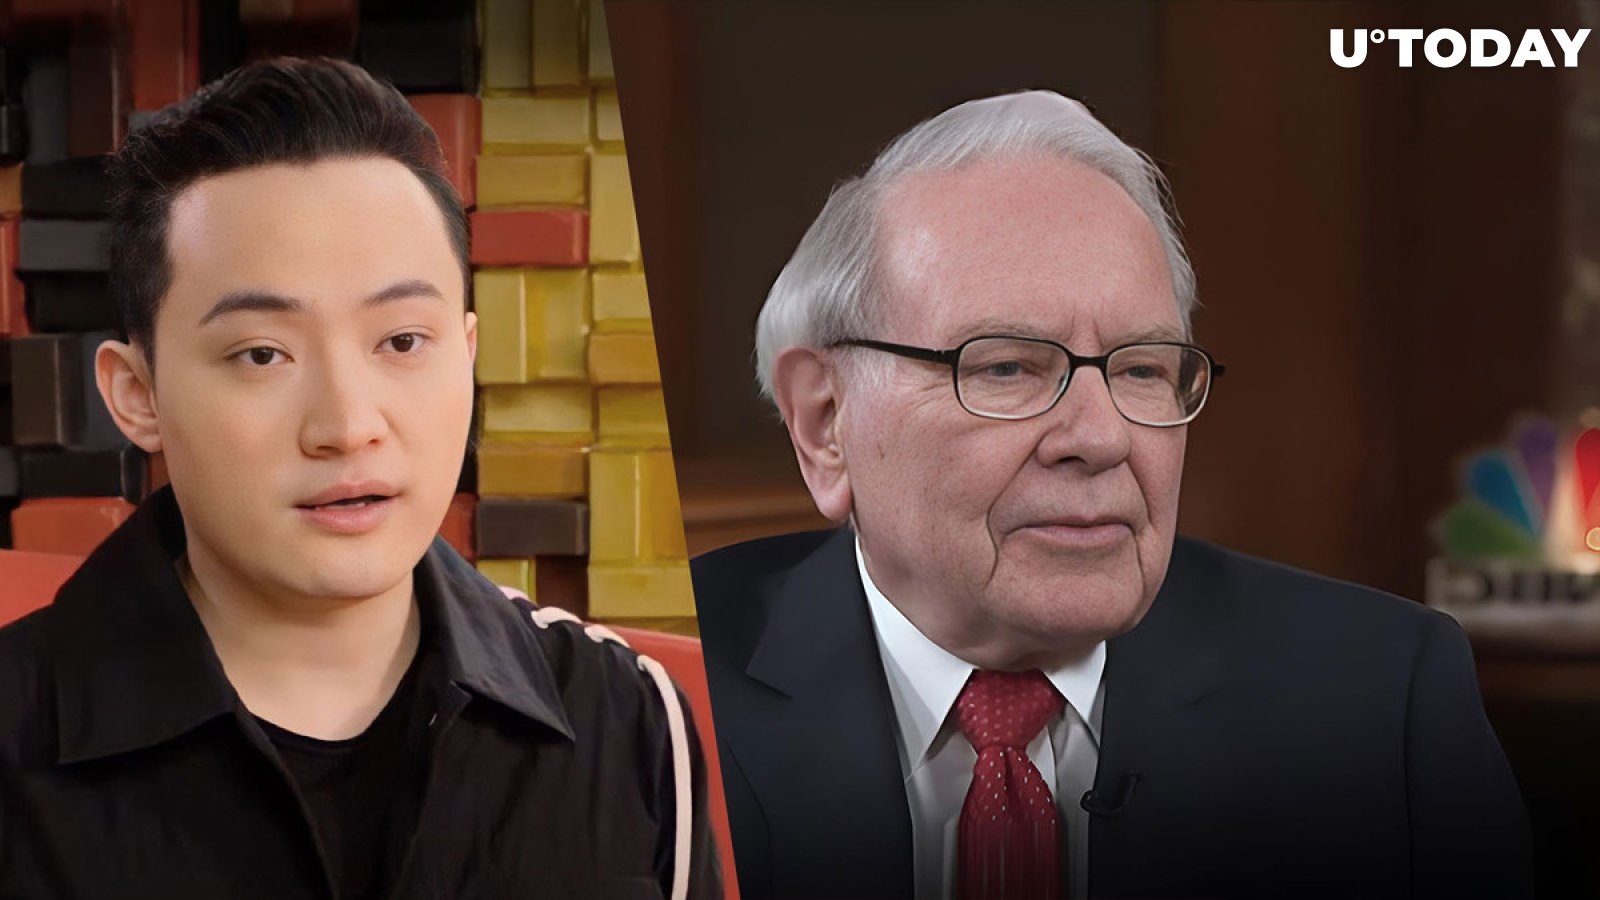 Tron founder reveals crucial impact Warren Buffett had on him with $4.56 million lunch